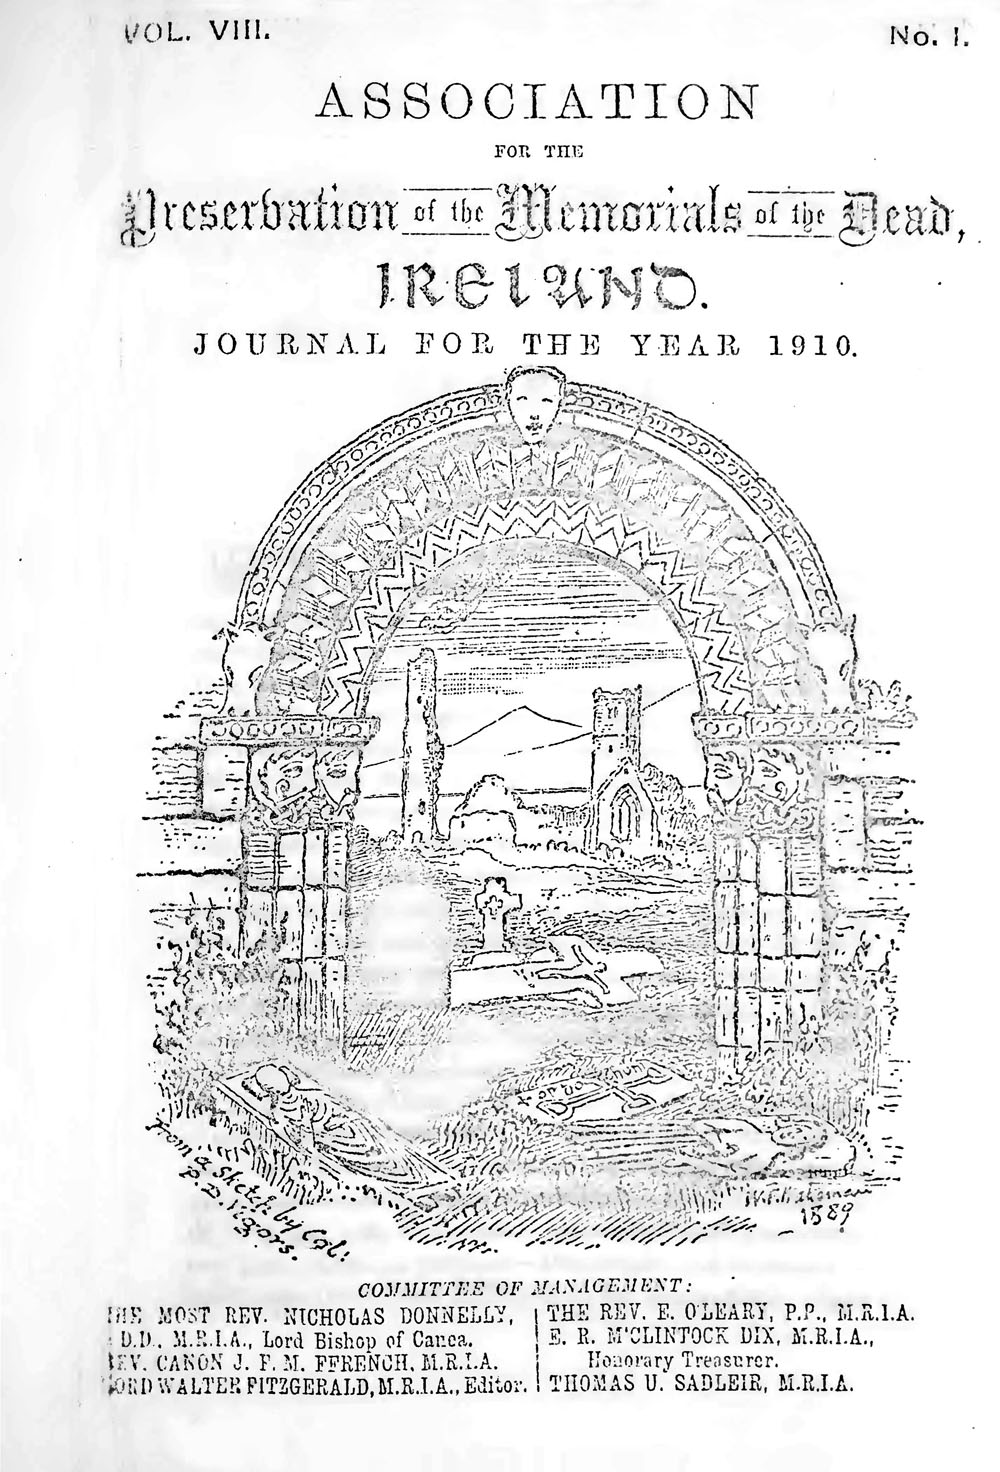 Journal Cover 1910